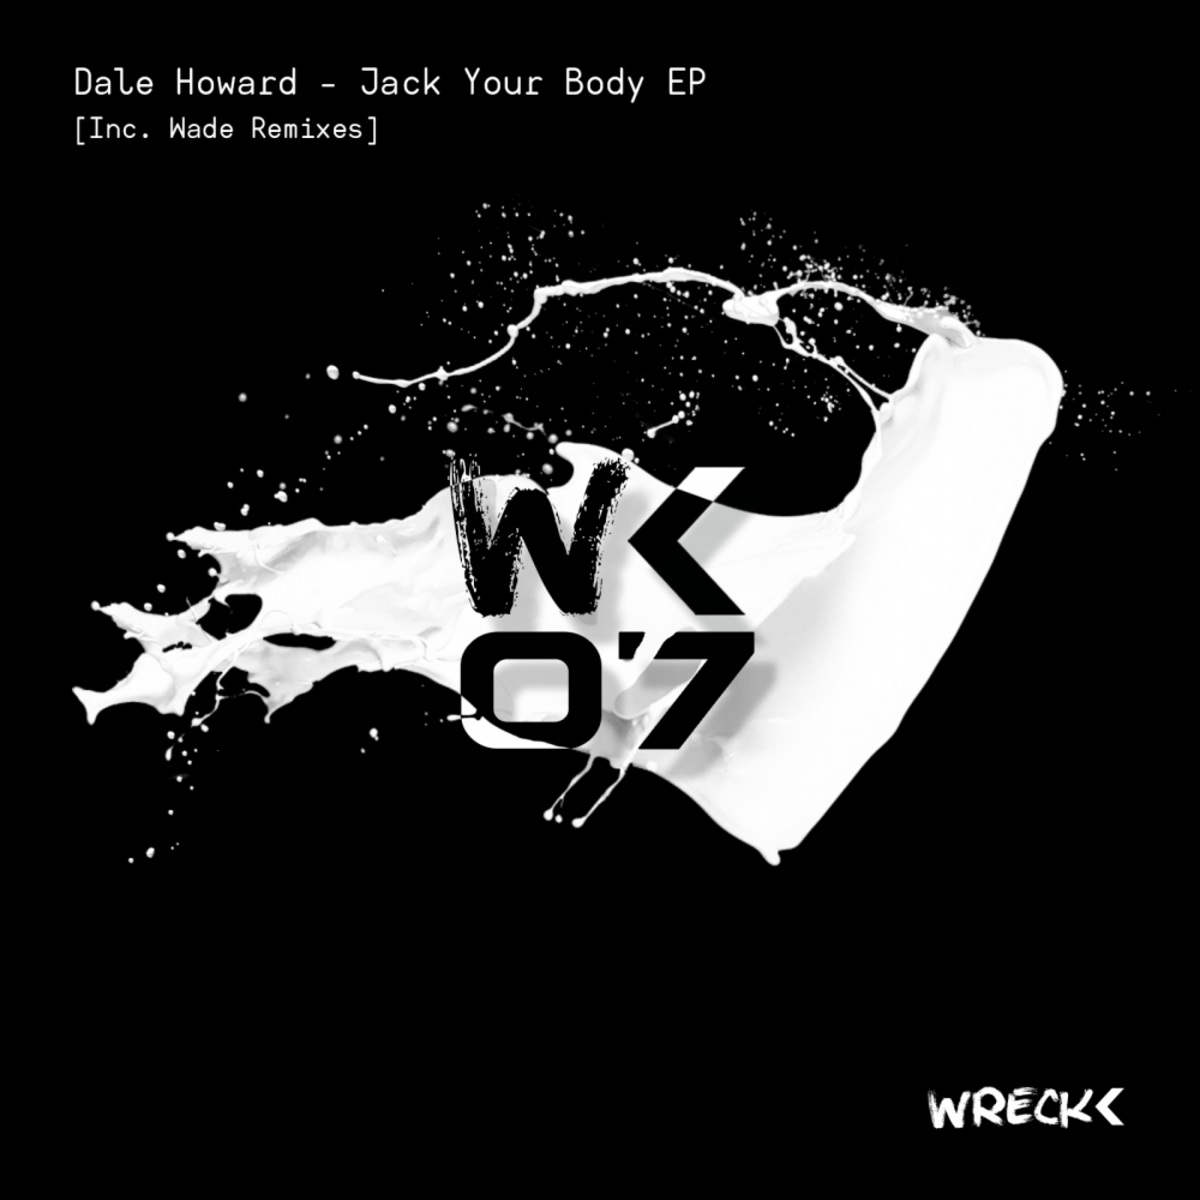 Dale Howard - Jack Your Body EP / Wreck